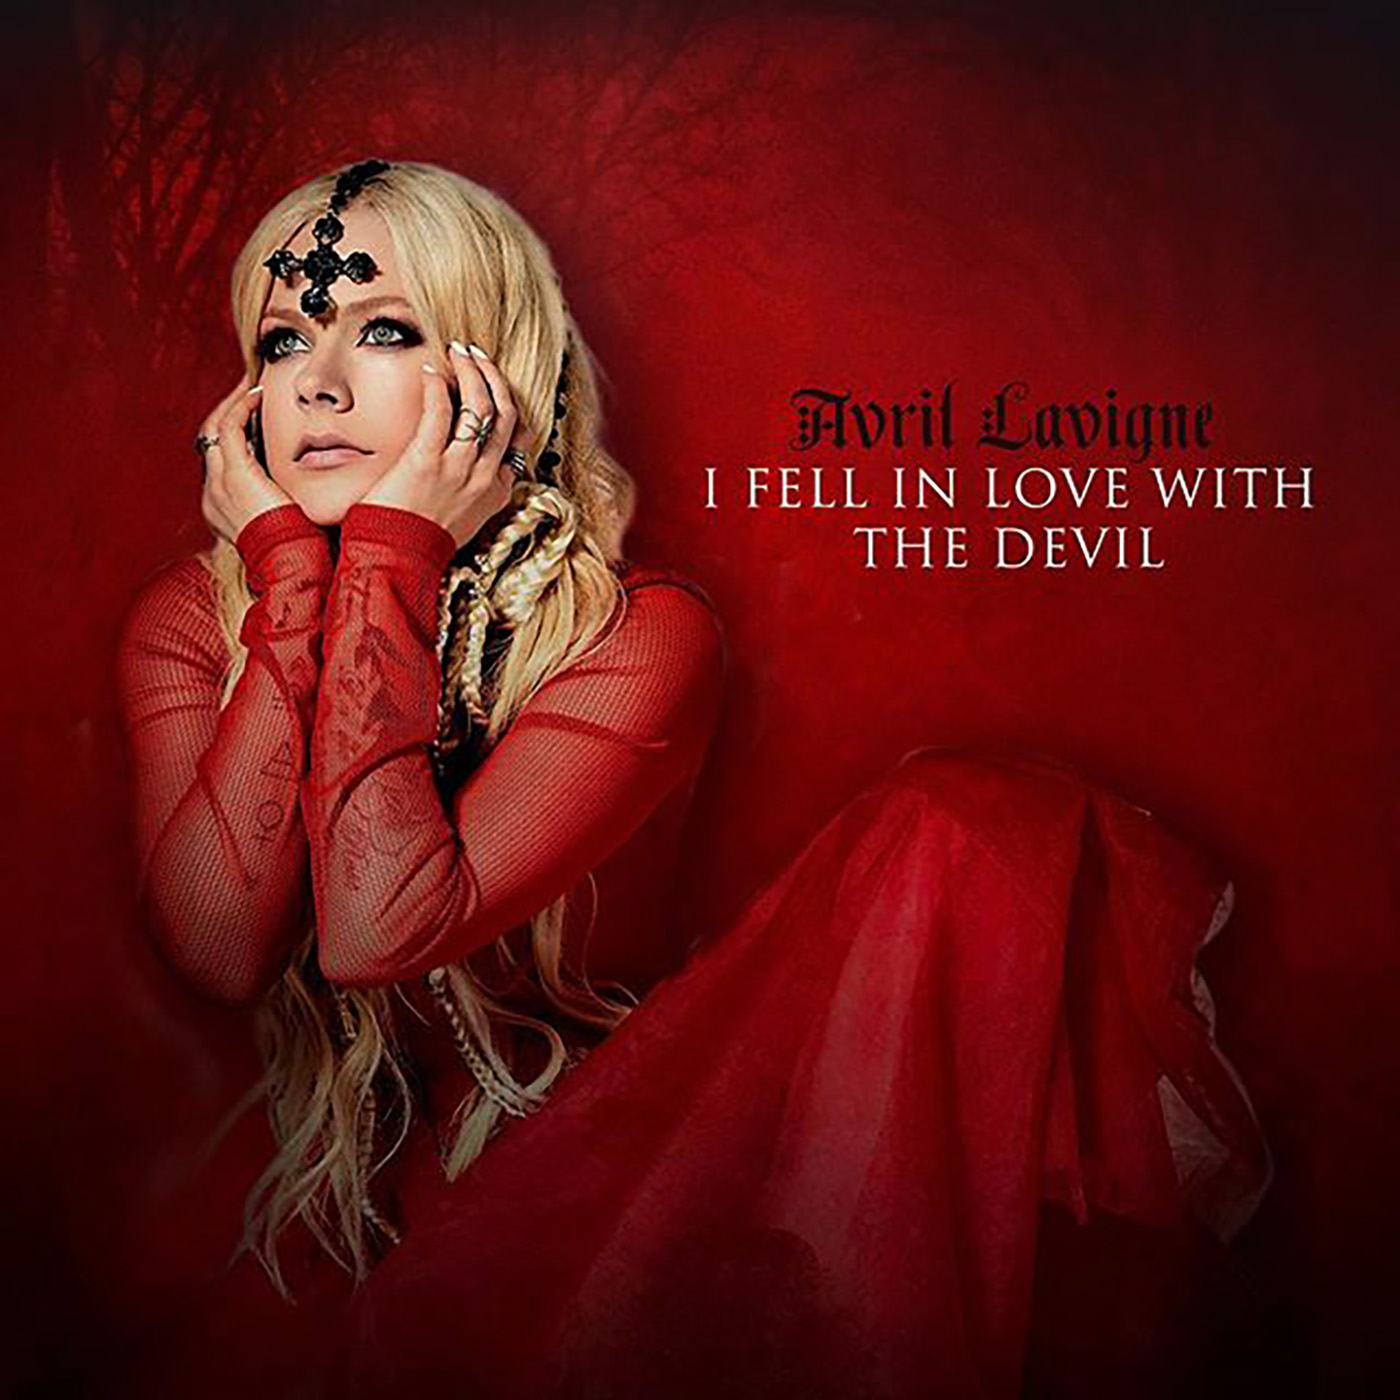 AVRIL LAVIGNE | IFELL IN LOVE WITH THE DEVIL